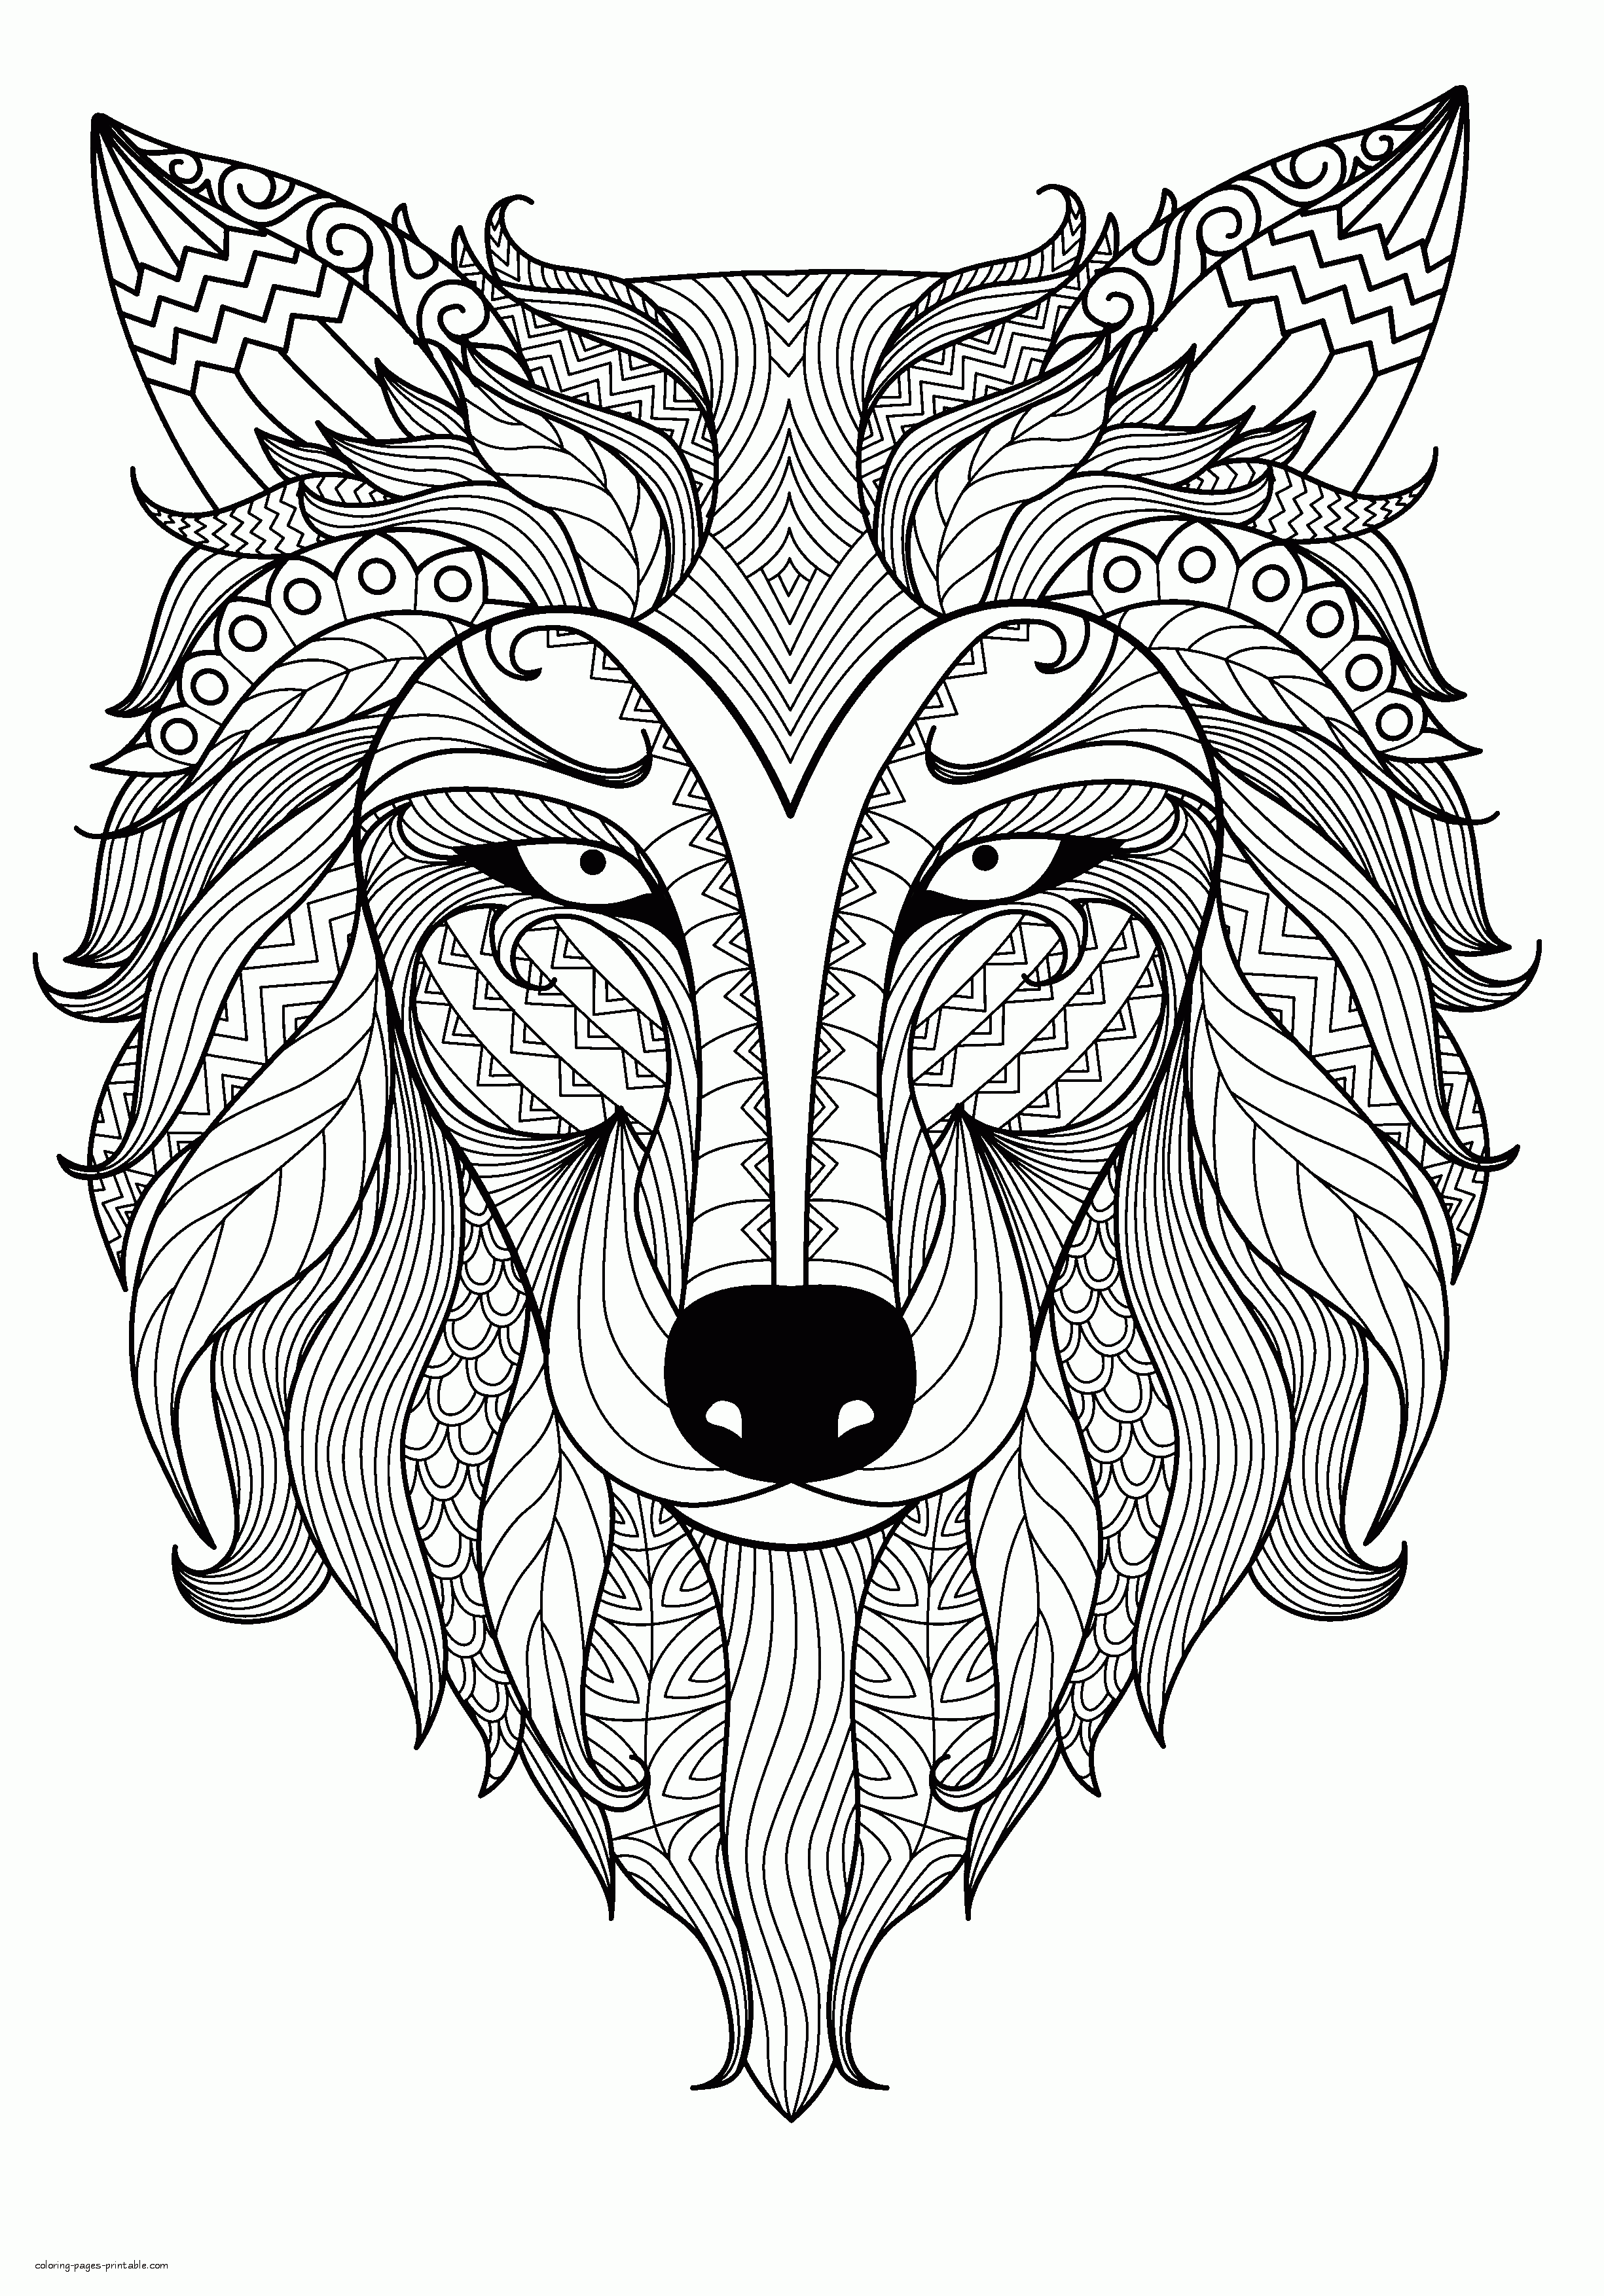 Relax Coloring Pages. Animal Faces |